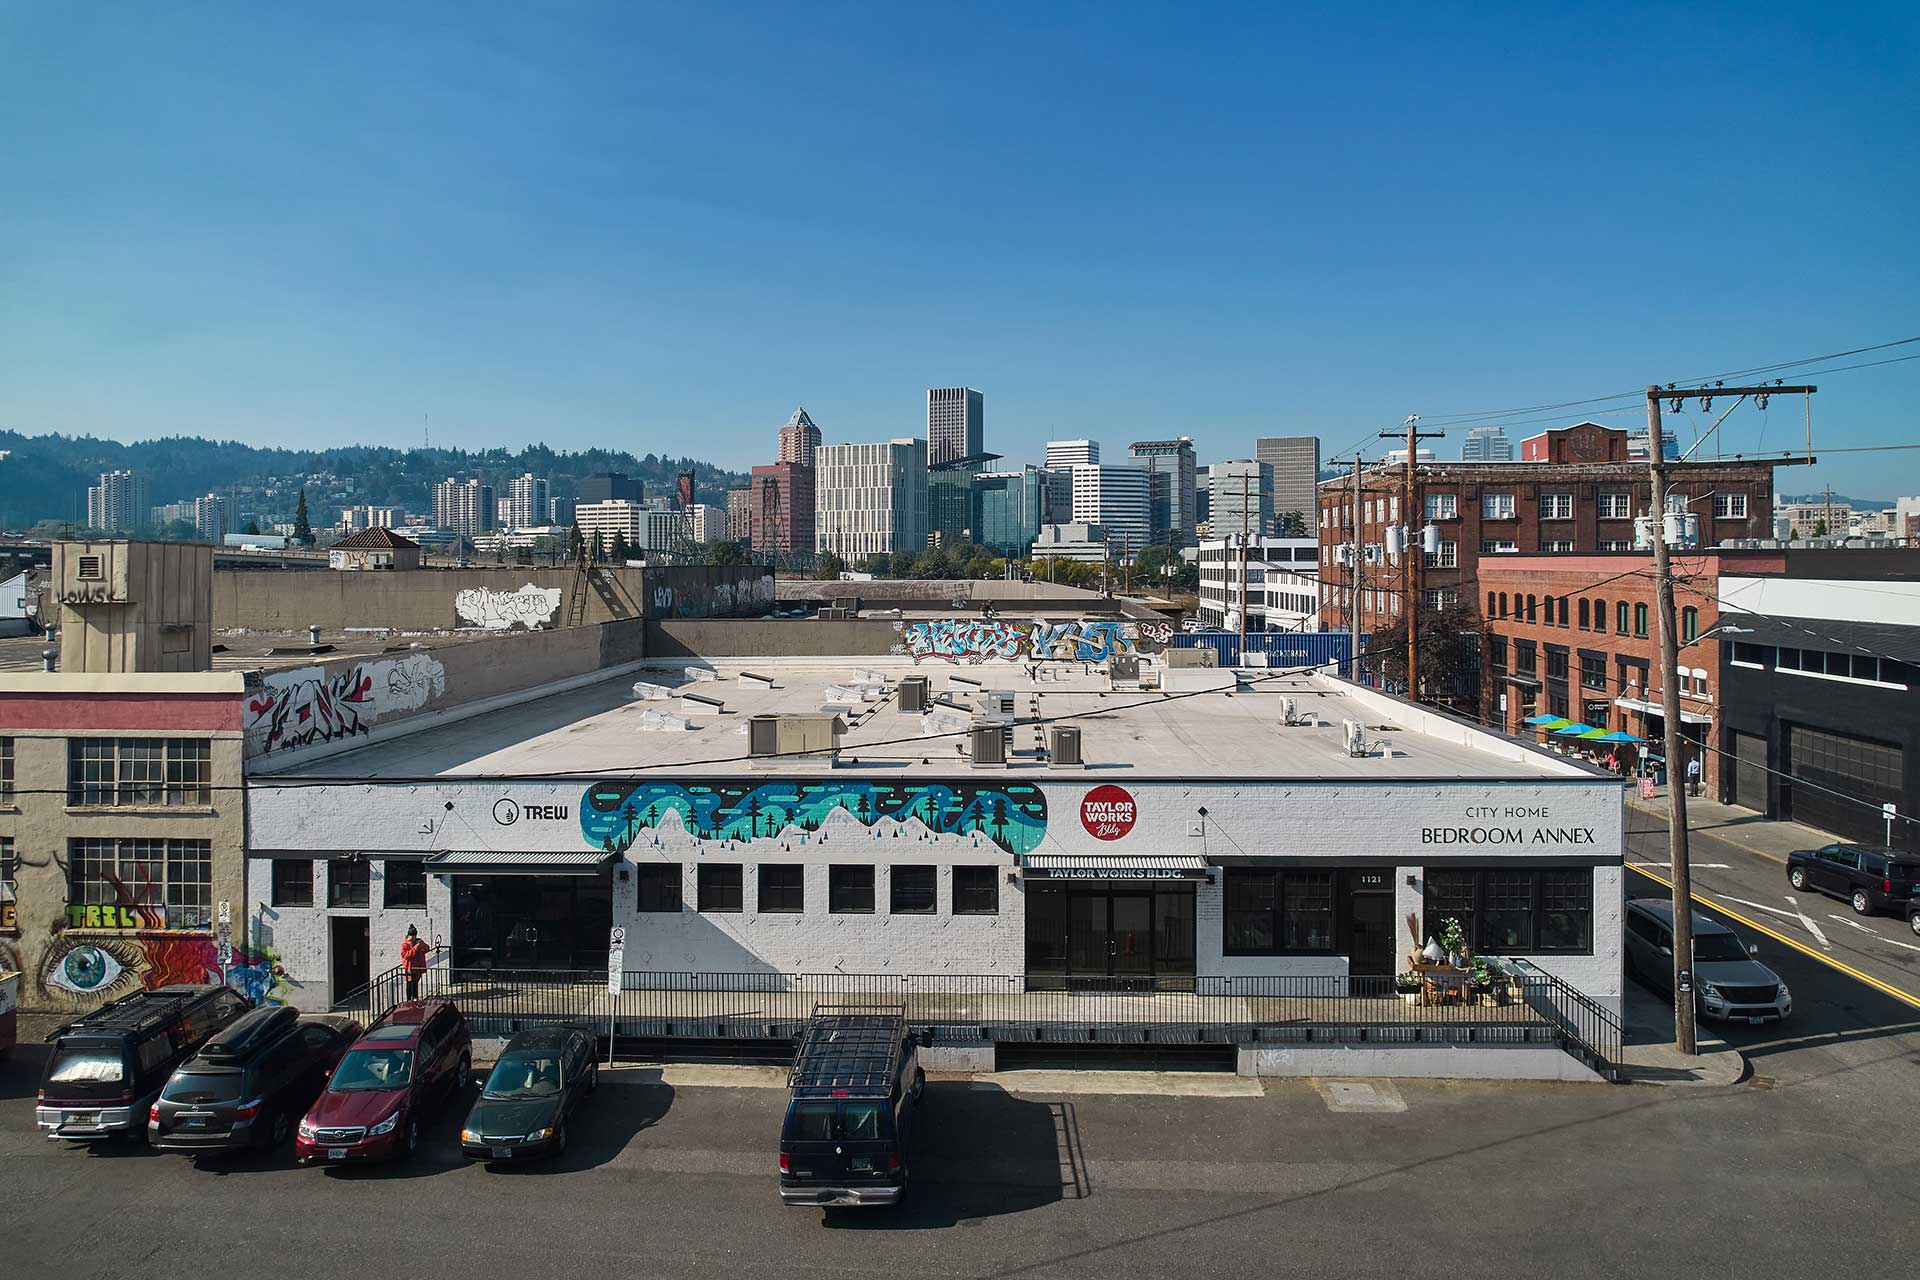 East elevation of the warehouse renovation with the downtown Portland skyline in the background.